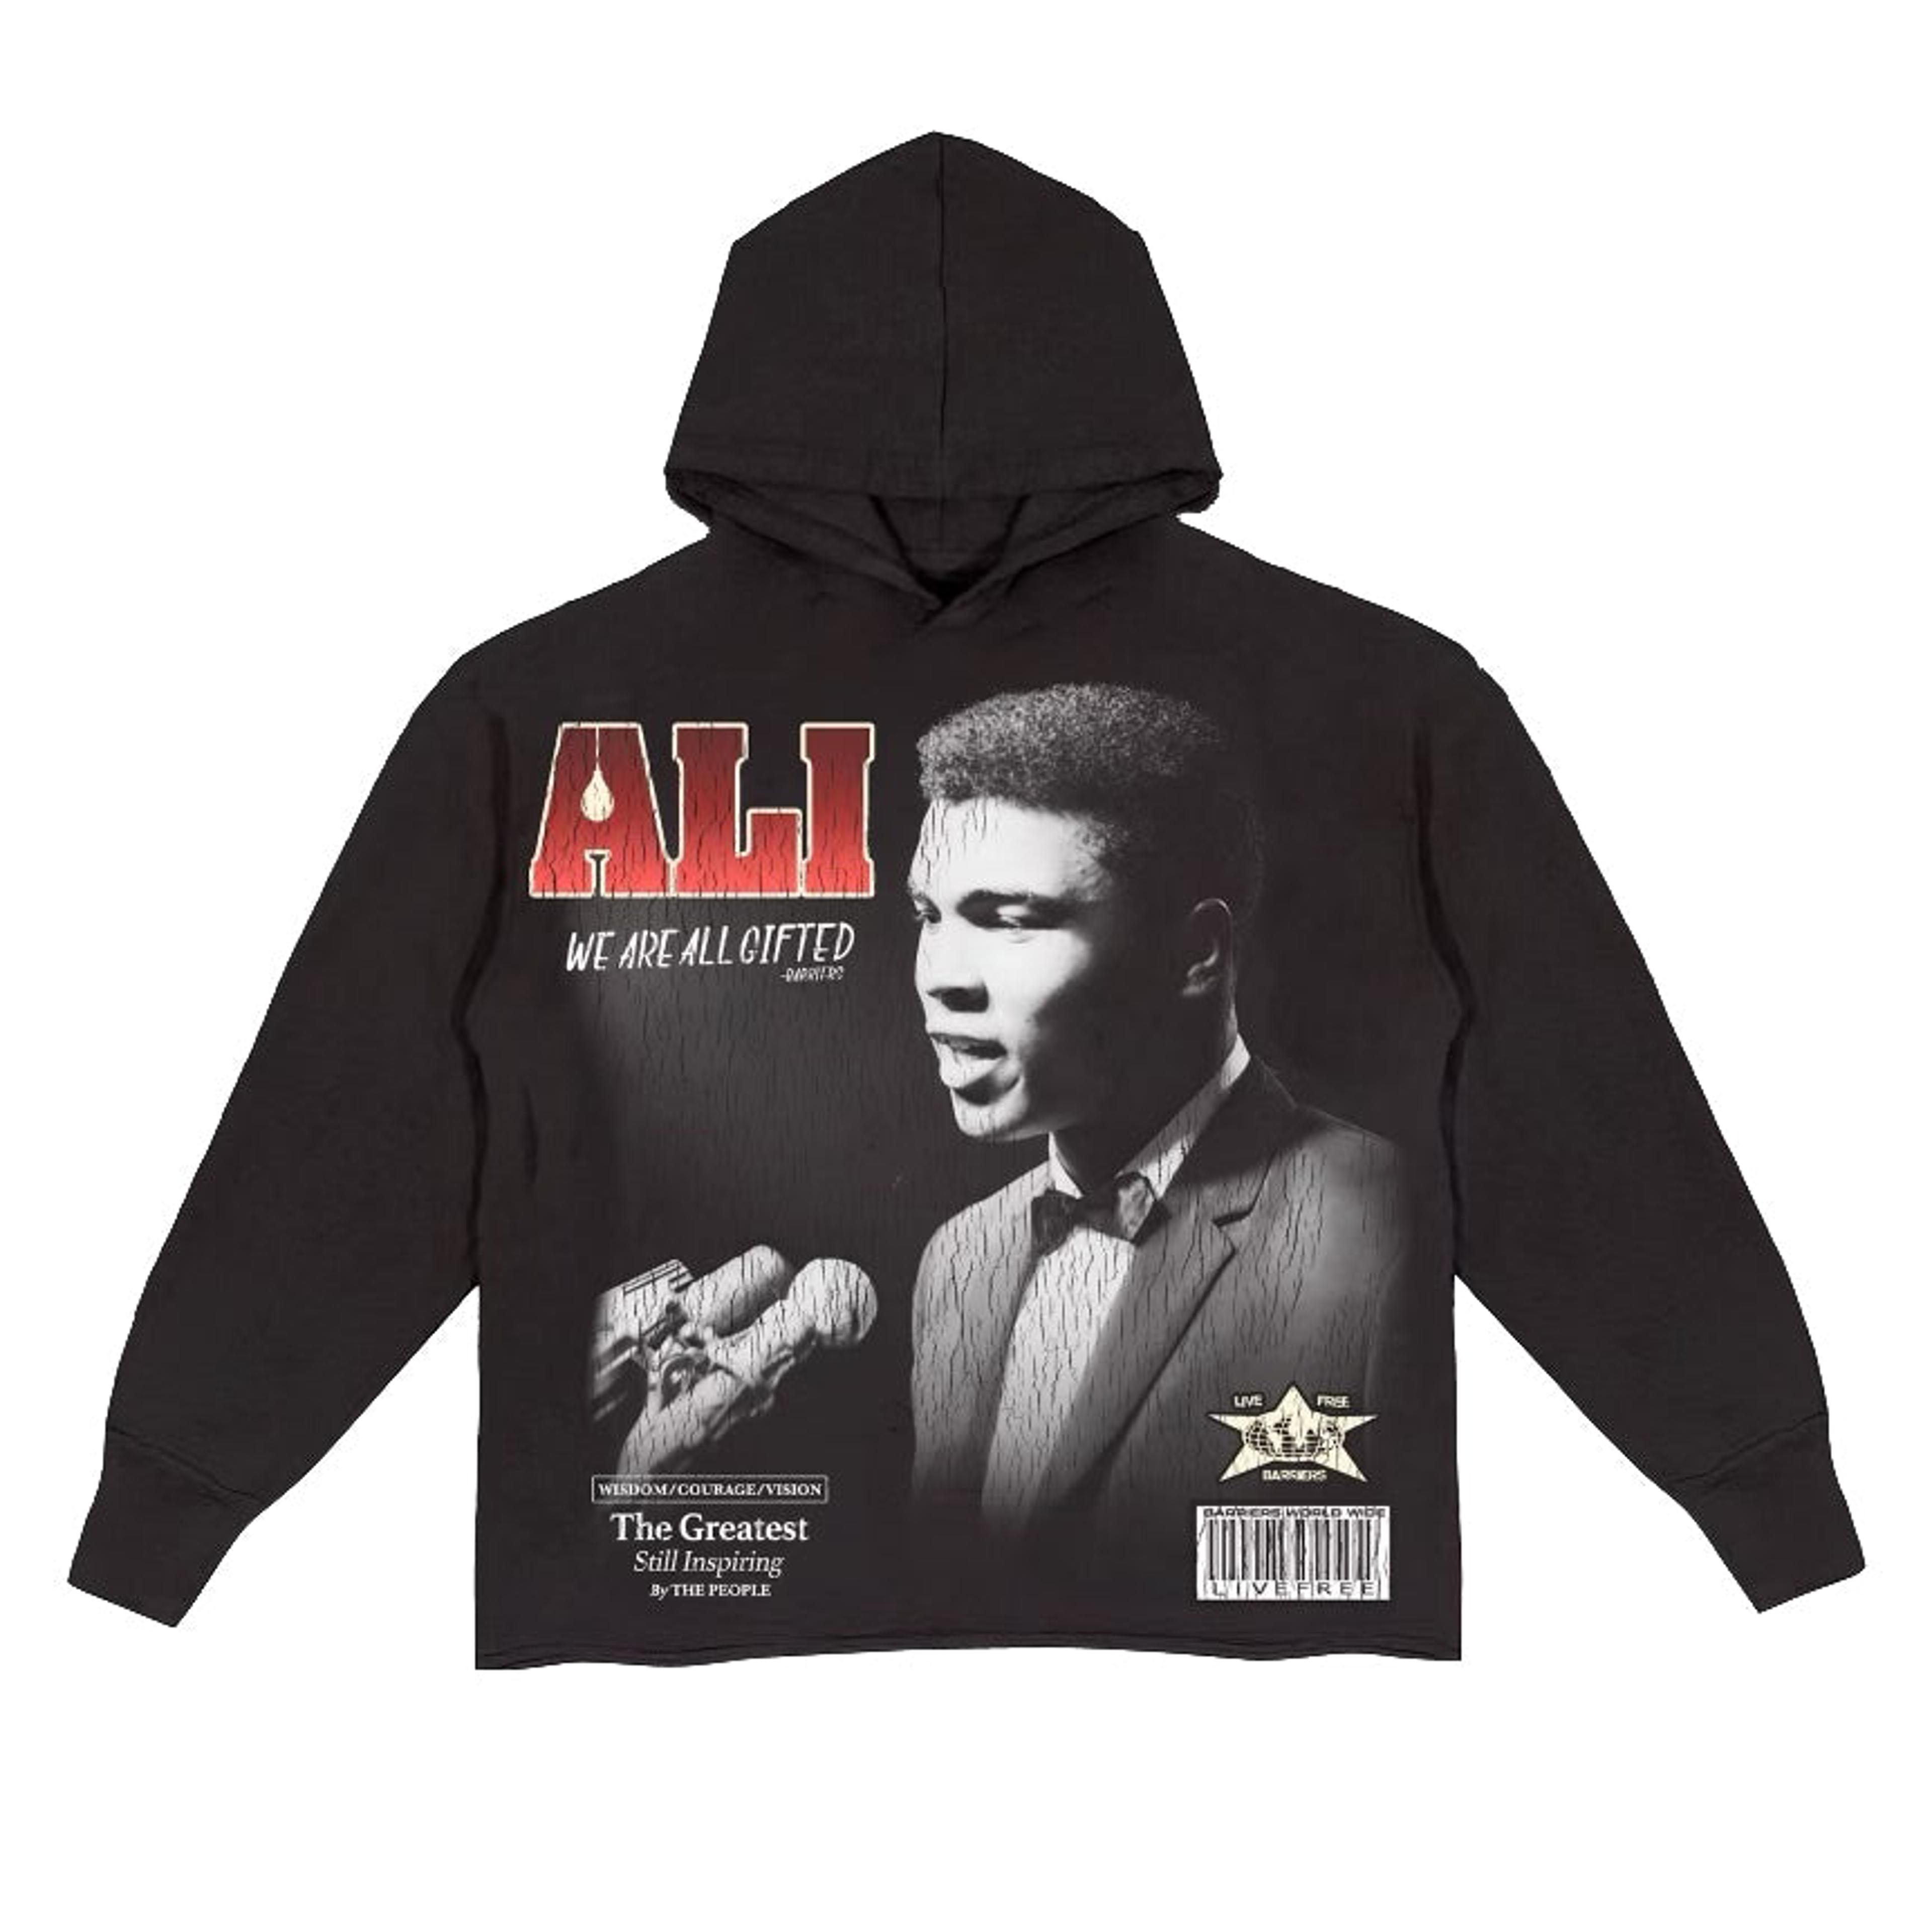 Barriers Ali "We Are All Gifted" Hoodie